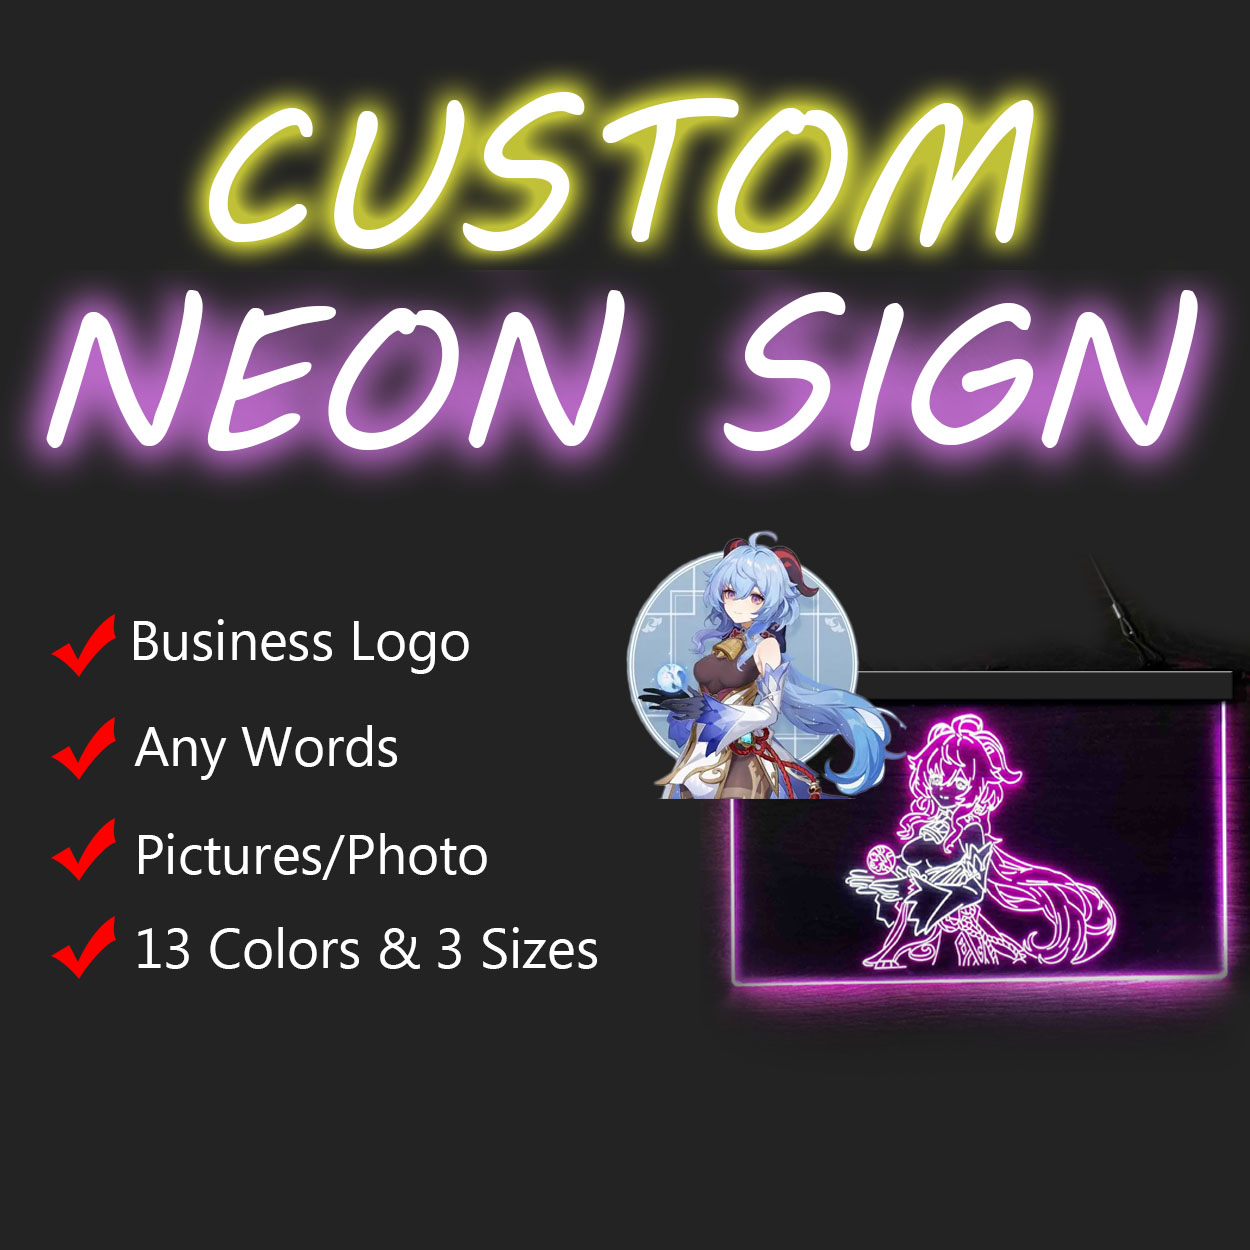 Personalized Custom Your Own Neon Sign Picture/Text Available - Two Colors Combination